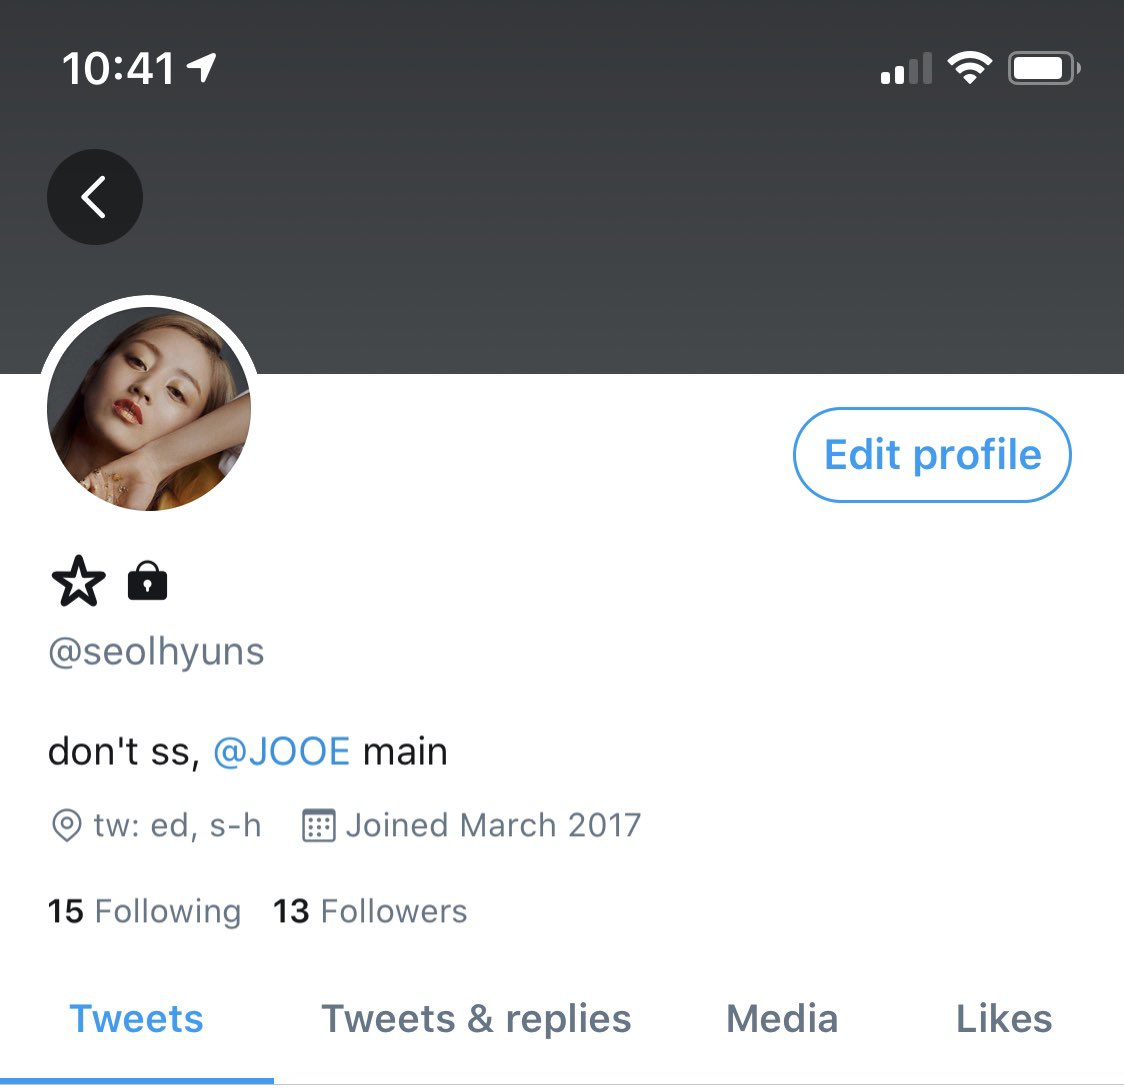 4. priv layout (yes i changed it to jihyo's allure pics. yes i'm gay.)